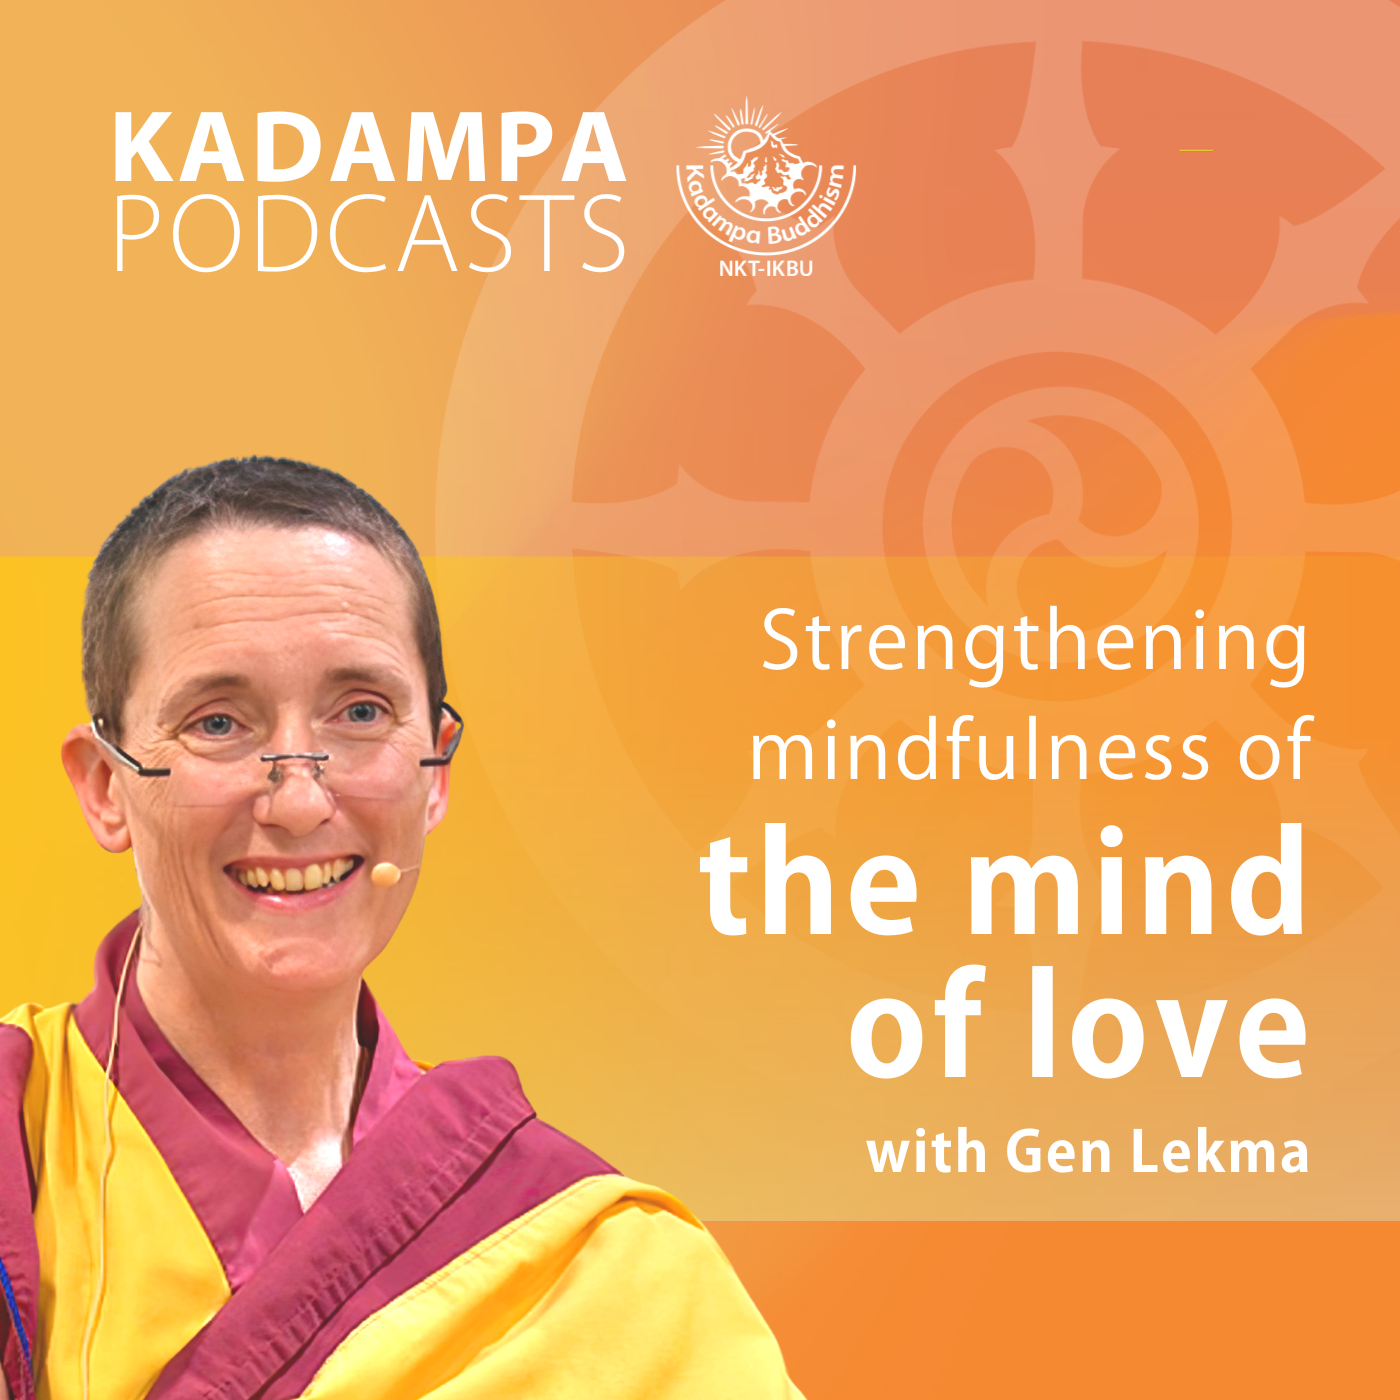 Strengthening mindfulness of the mind of love